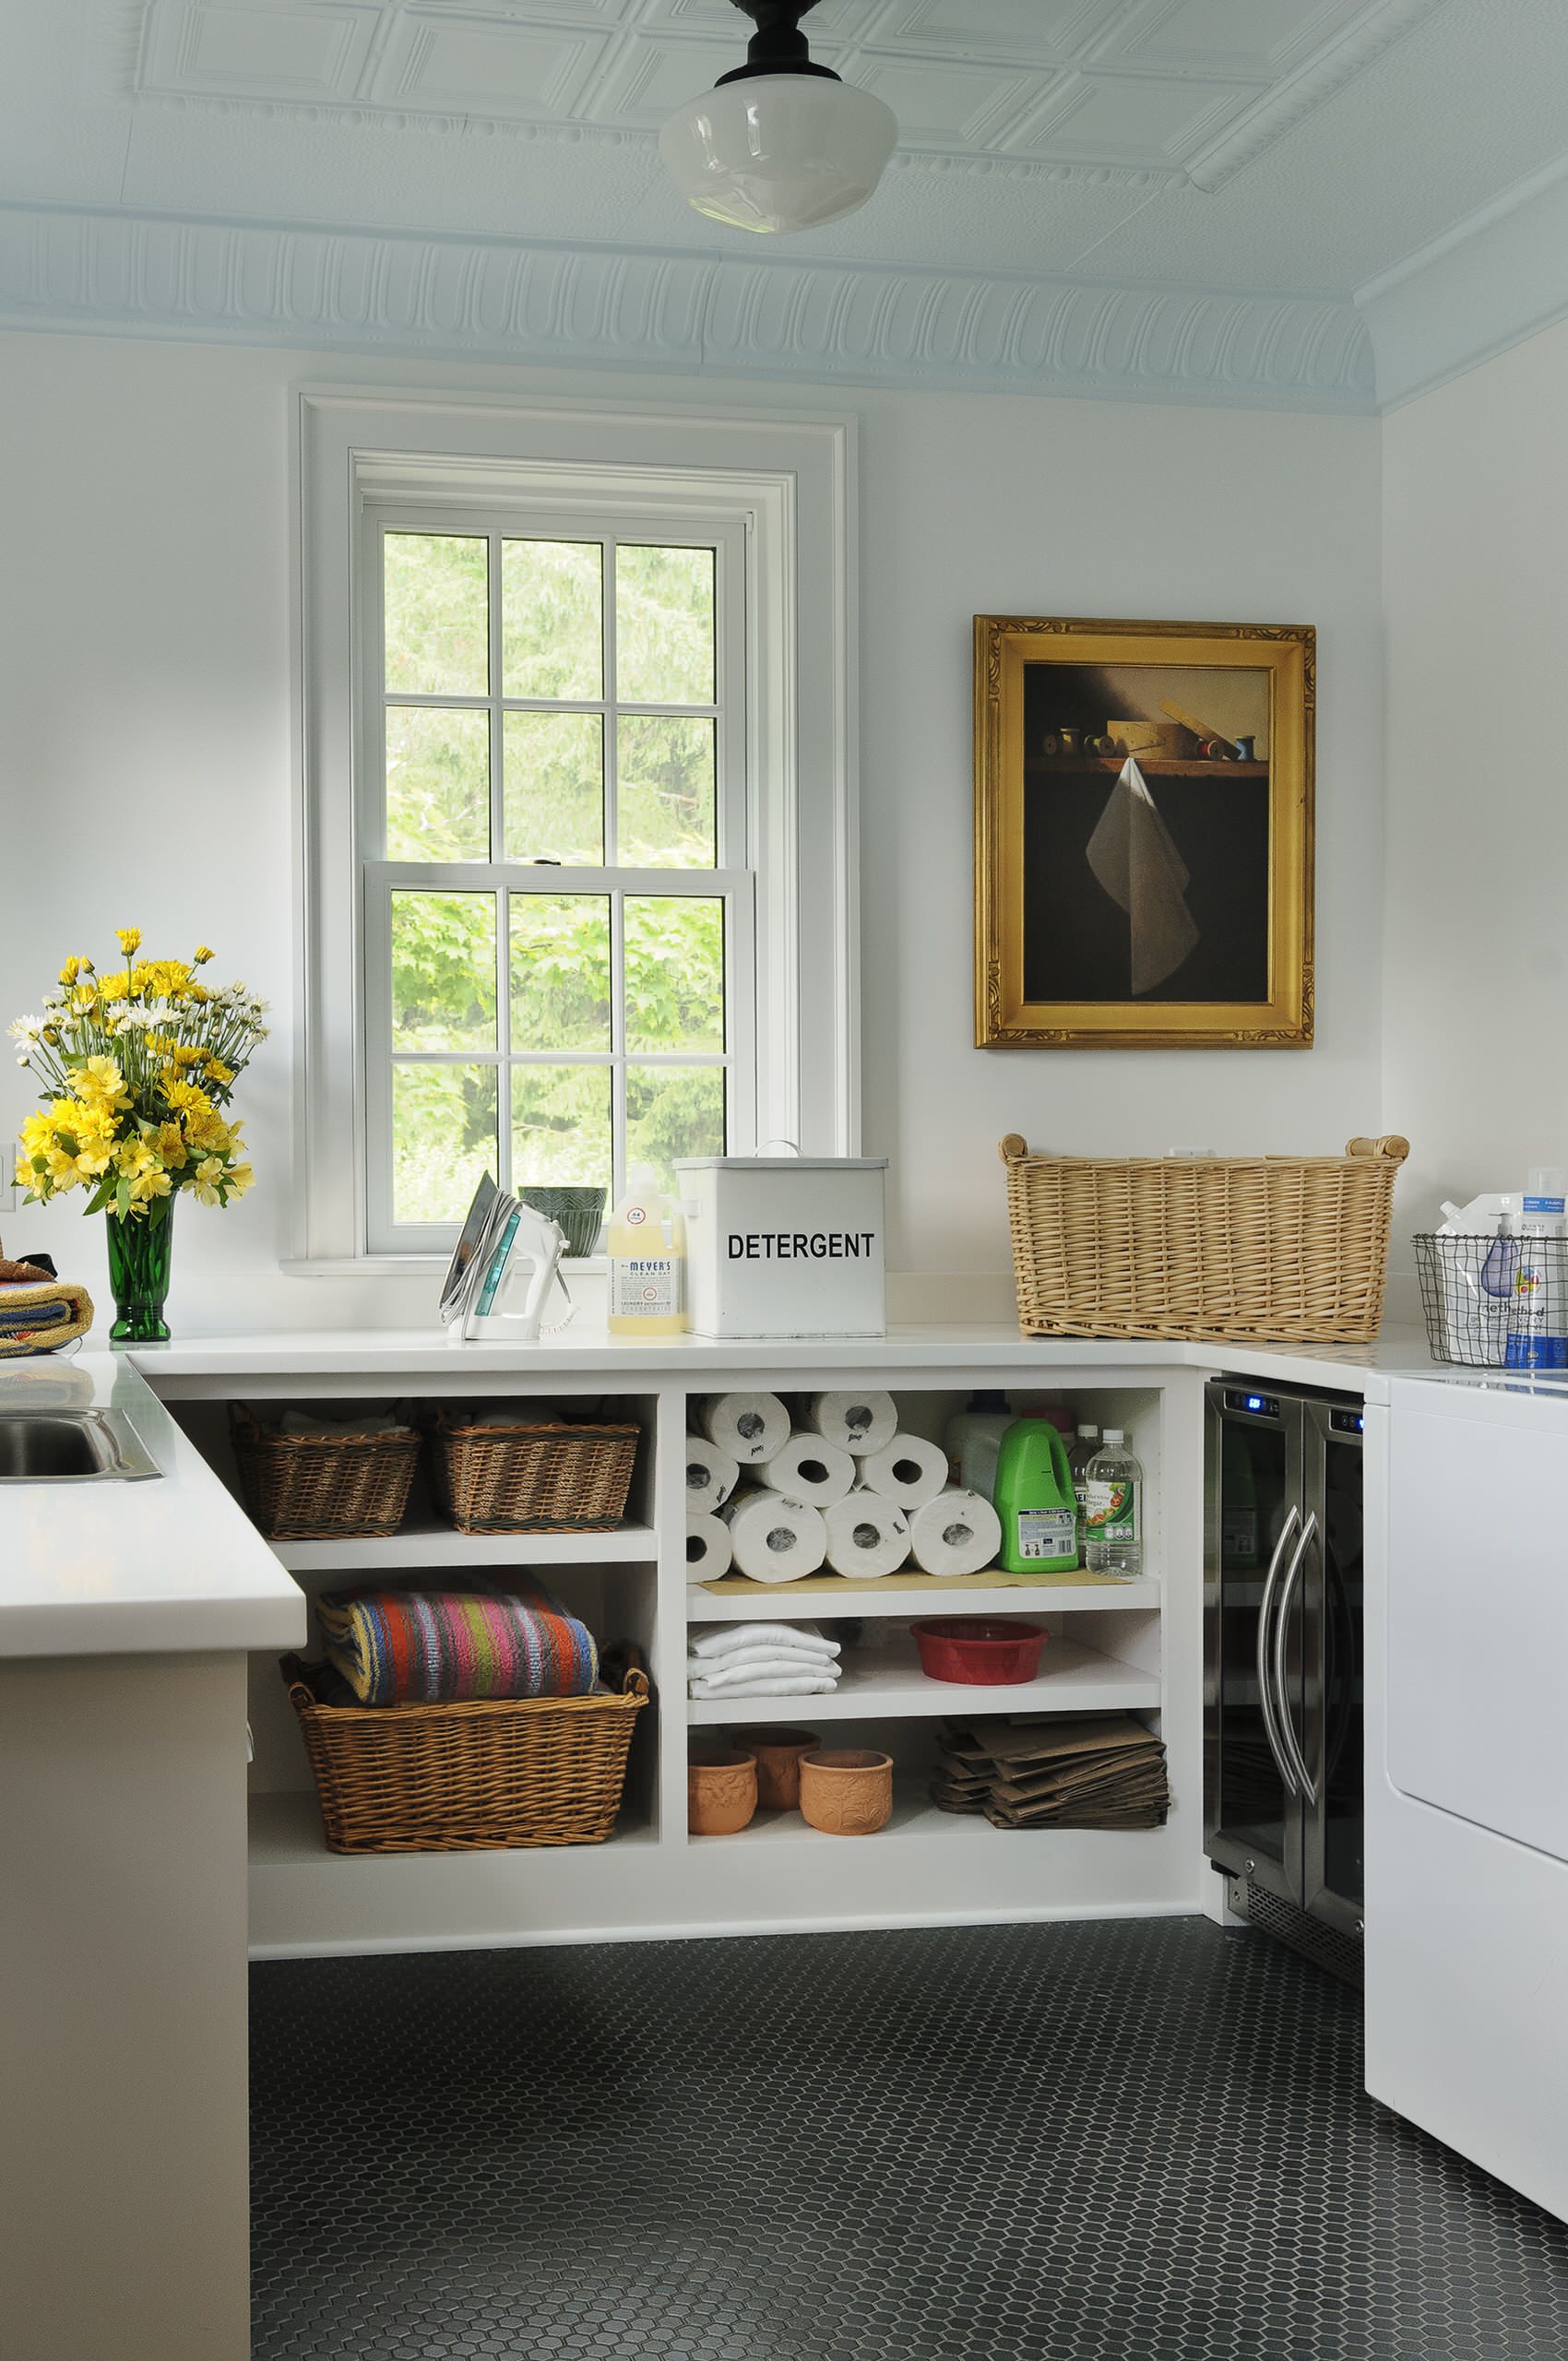 Utility Rooms, 50% off all cabinets